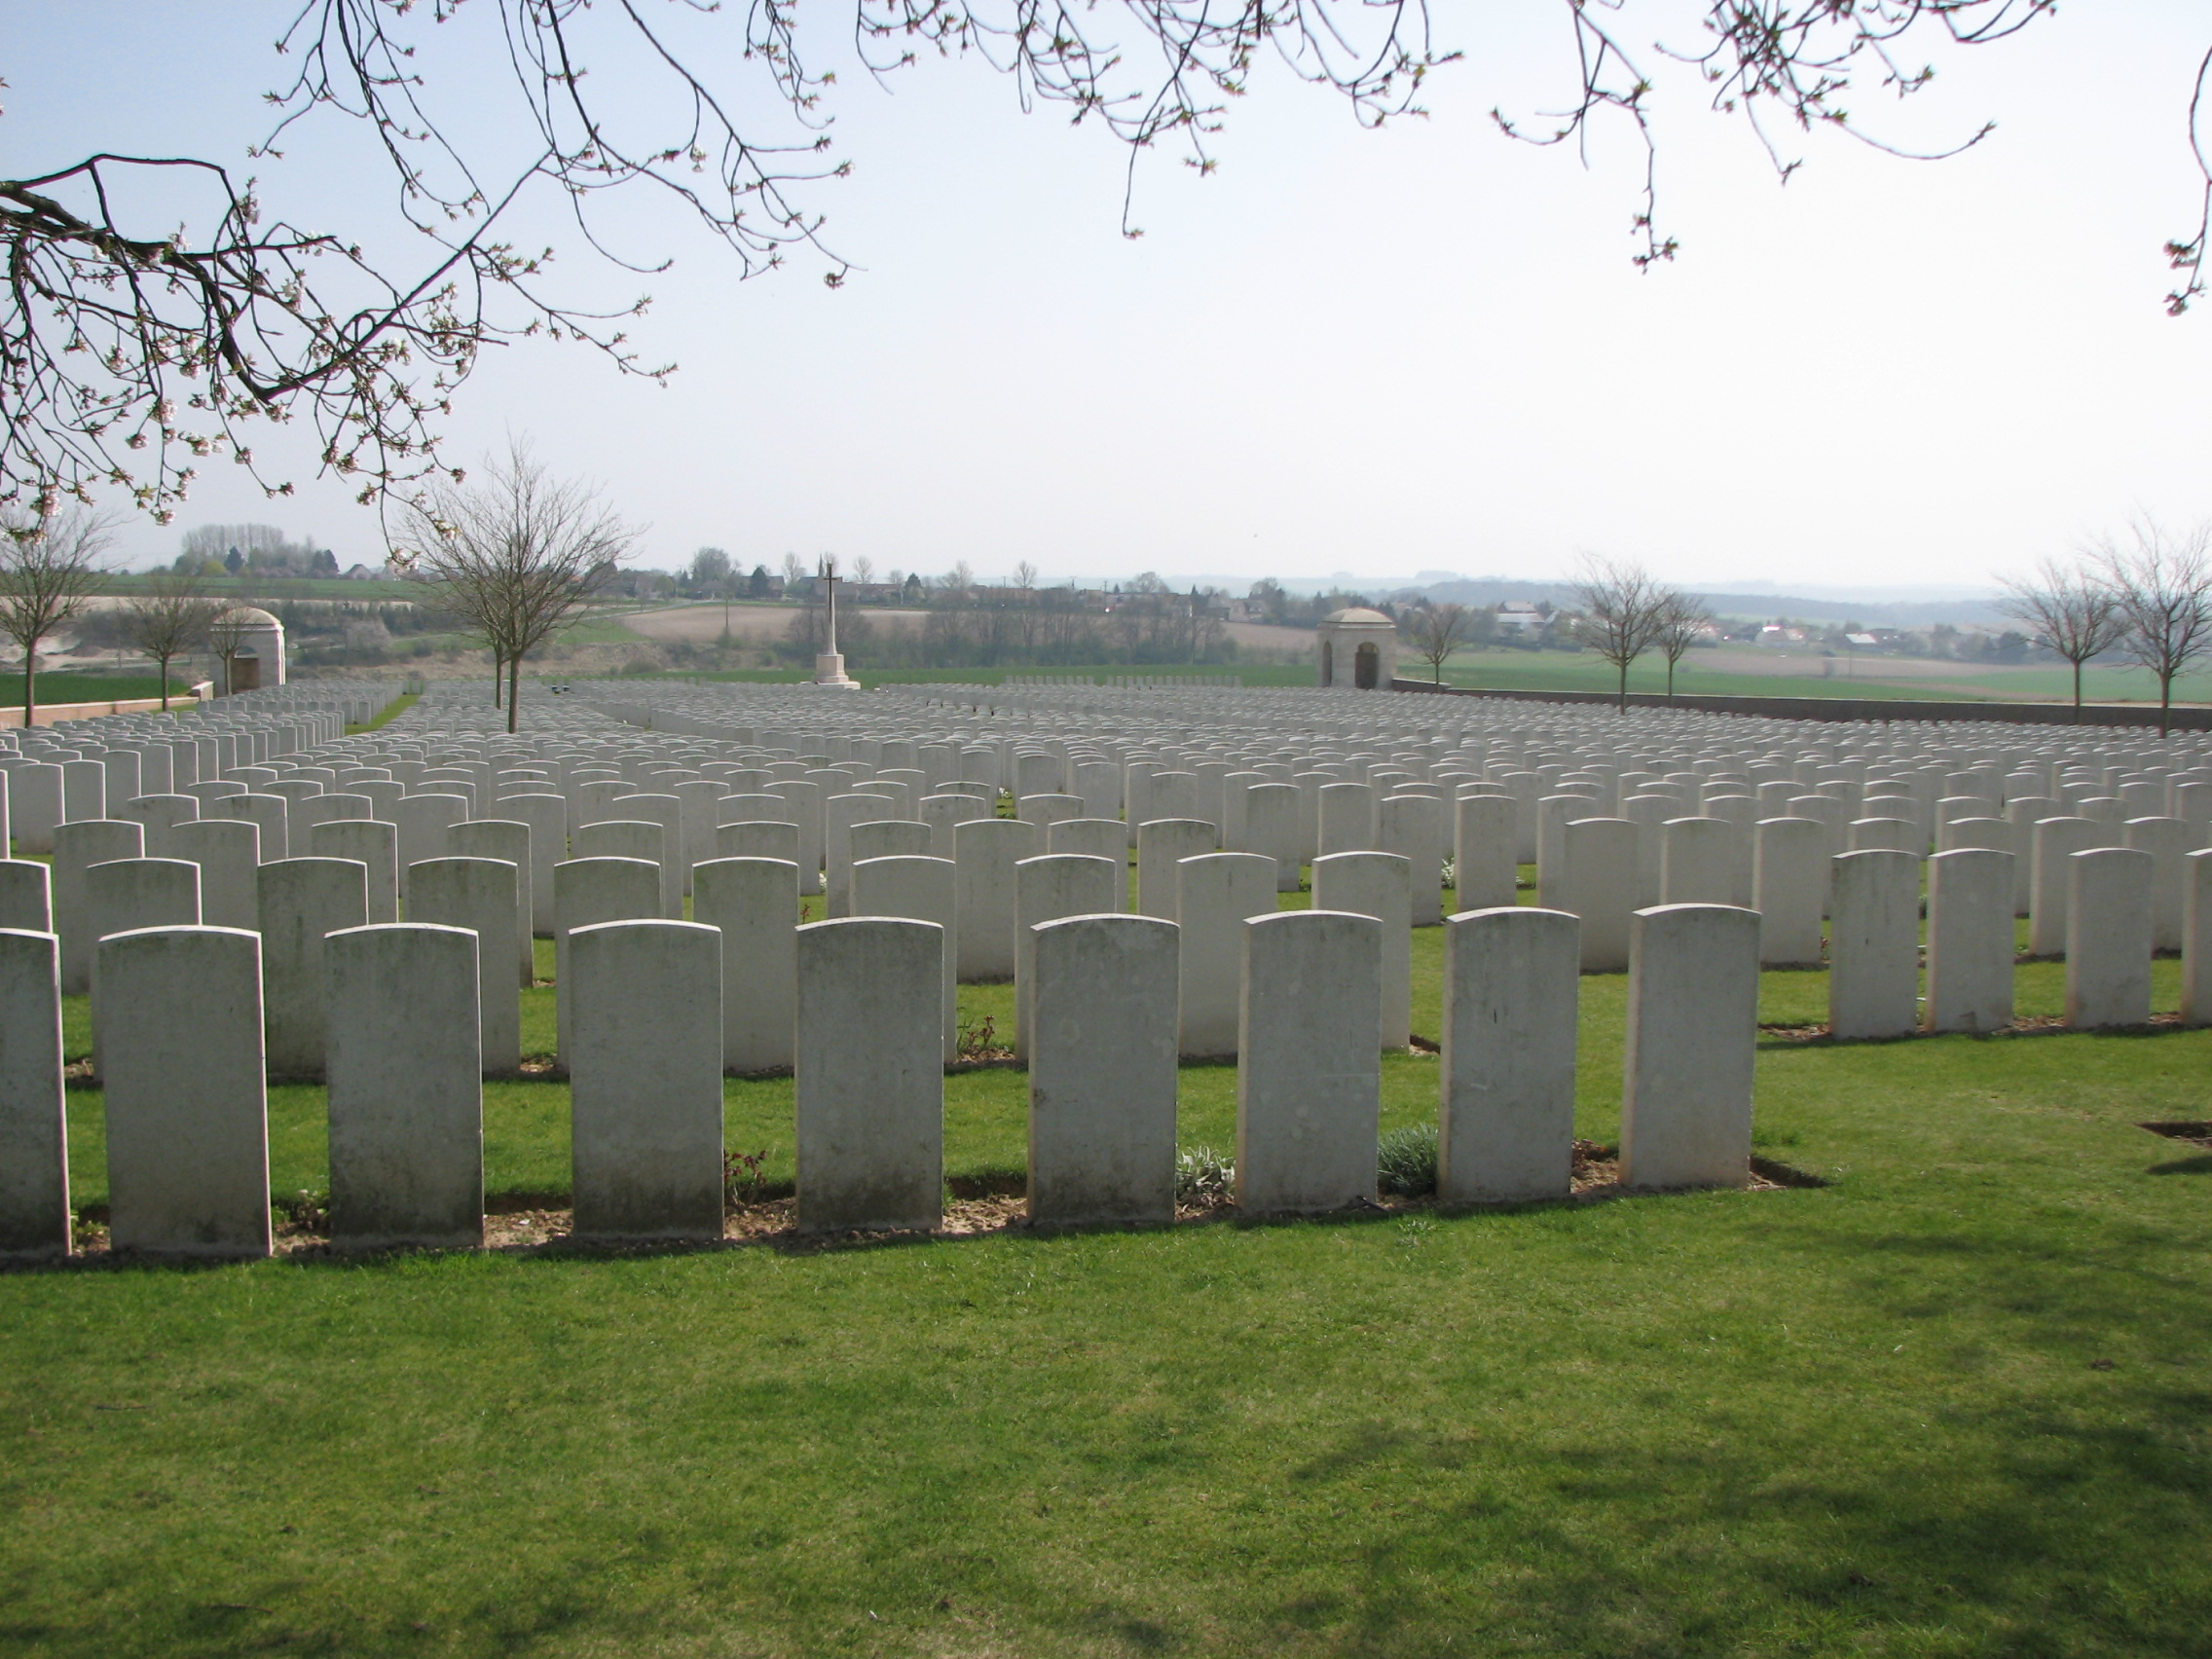 Ovillers Military Cemetery, Ovillers, near Albert, France<br>The village of La Boisselle can be seen in the distance<br />MA